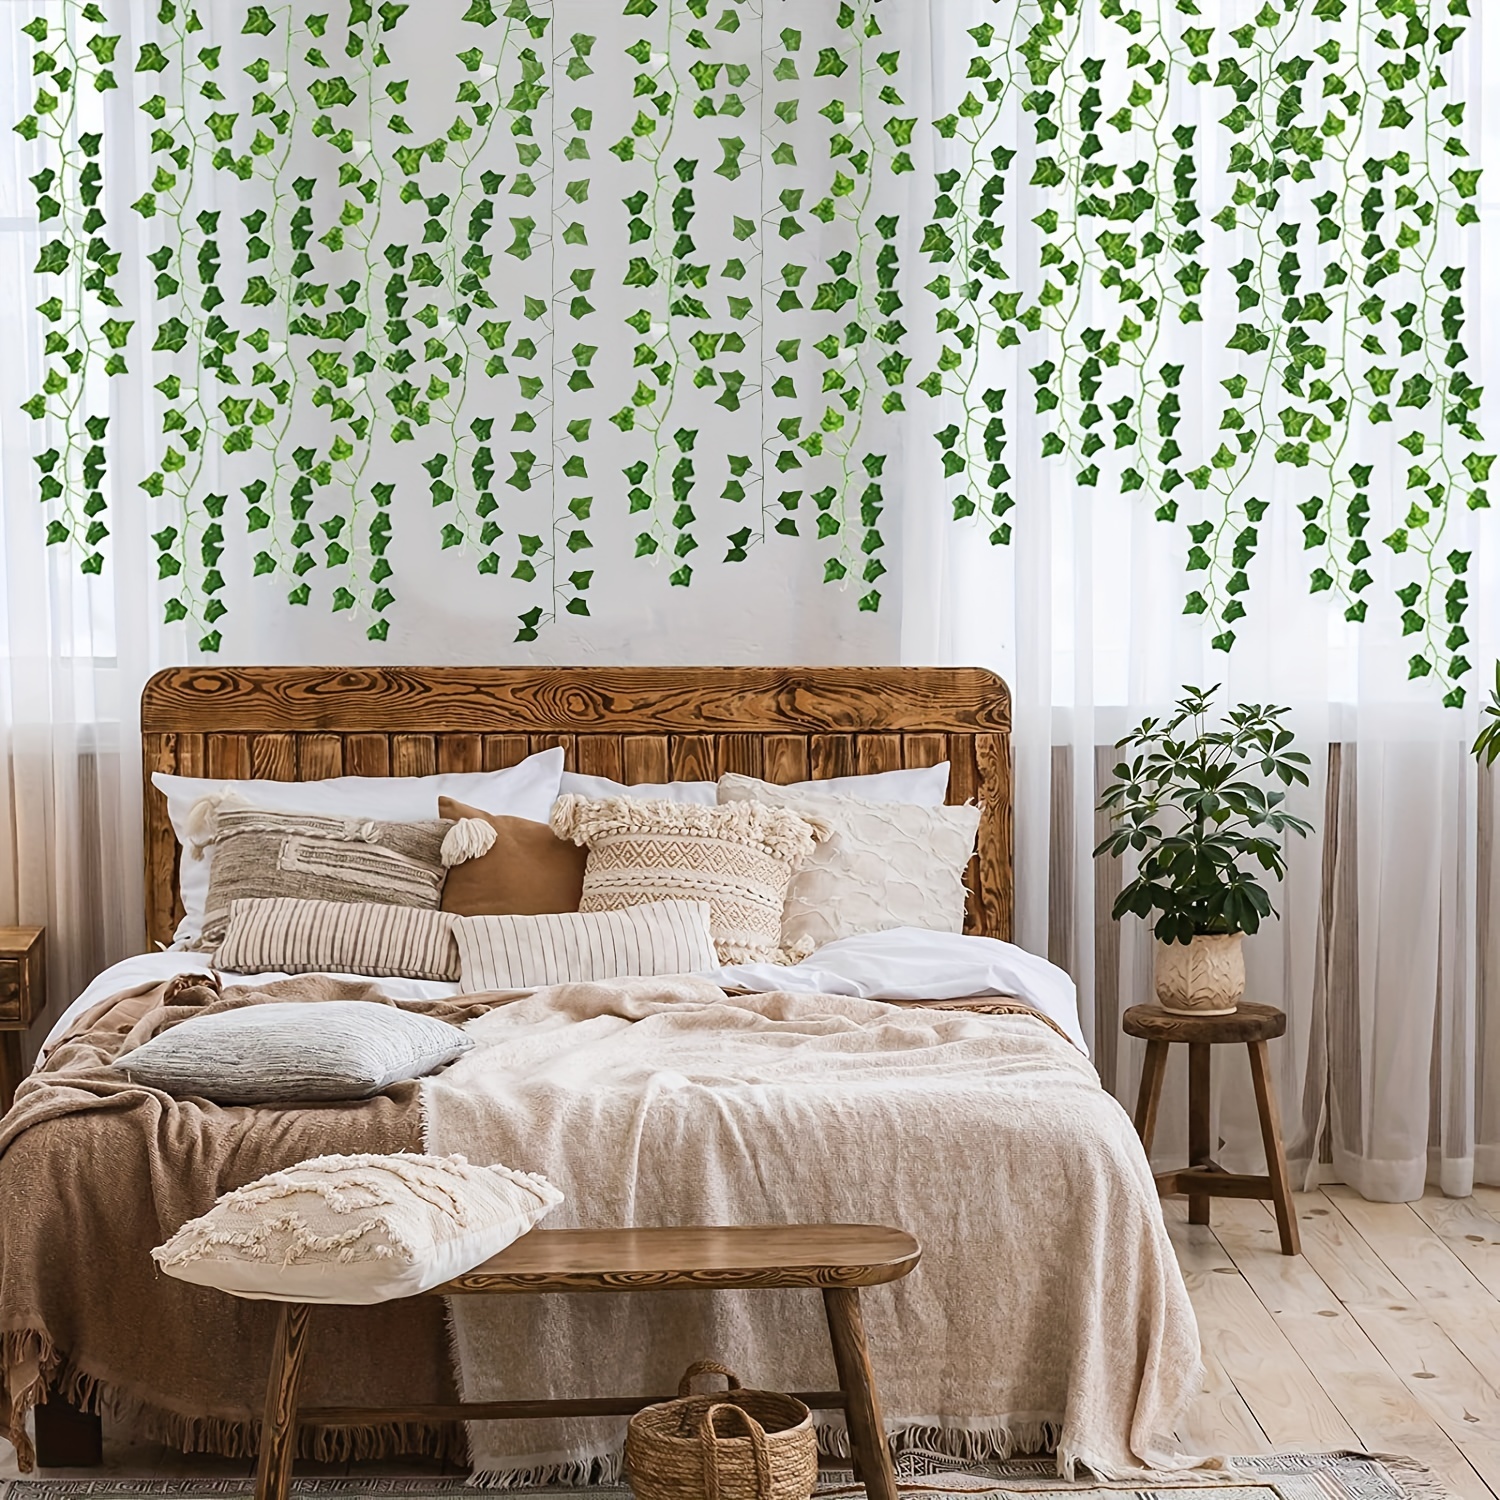 YAHUAA 12 Pack 84 Feet Fake Ivy Leaves Vines Artificial Garland Greenery Hanging Plants for Bedroom Decor Aesthetic, Party Wedding Wall